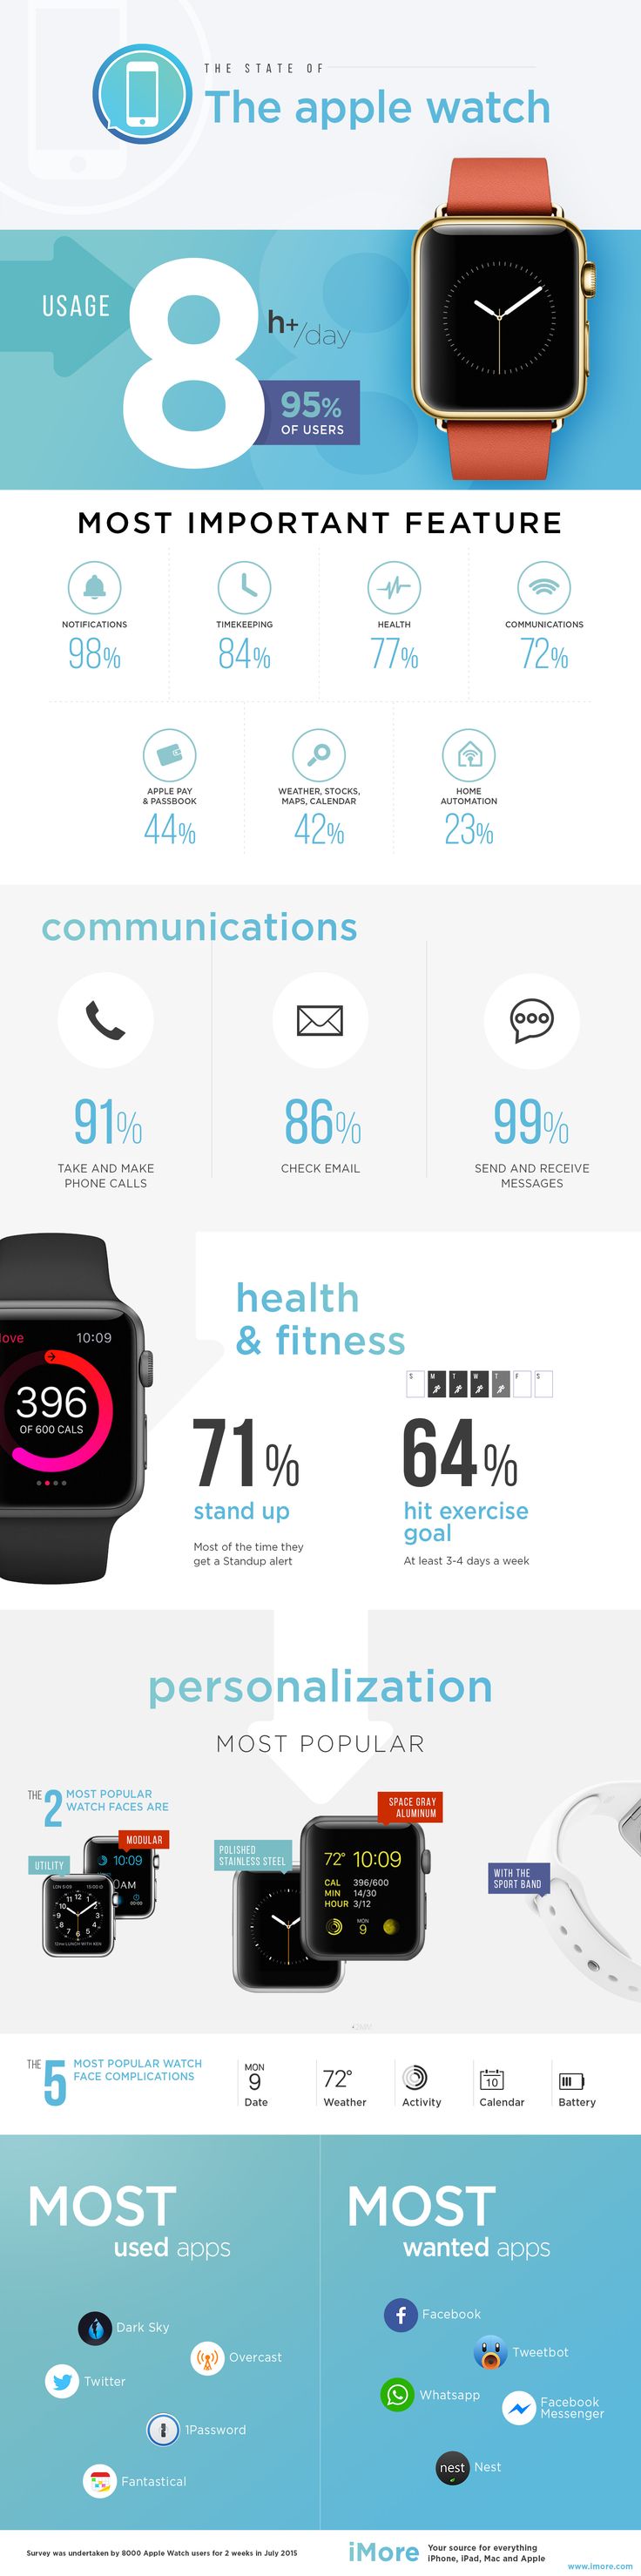 iMore survey shows ultra-high levels of Apple Watch usage | iMore